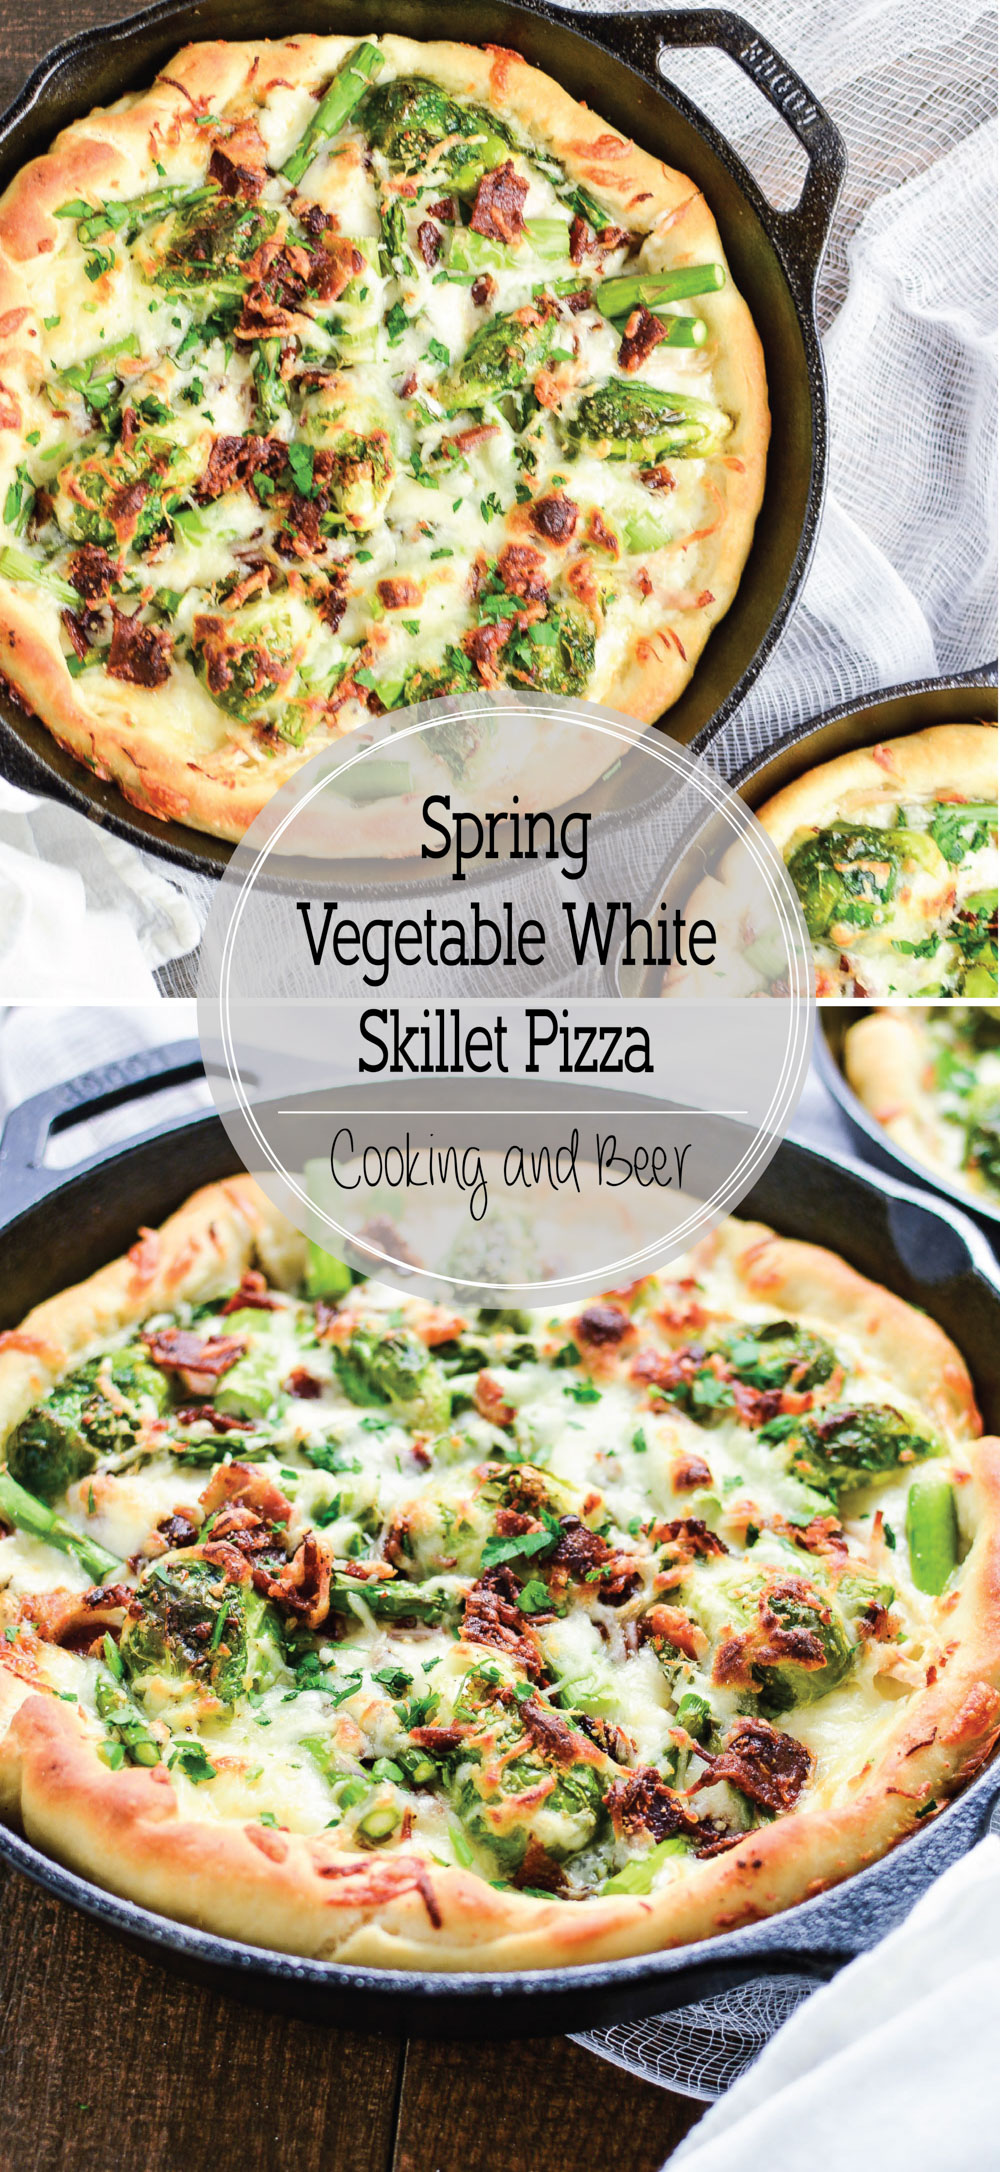 Spring Vegetable White Skillet Pizza is the perfect Friday night dinner recipe highlighting fresh spring flavors!